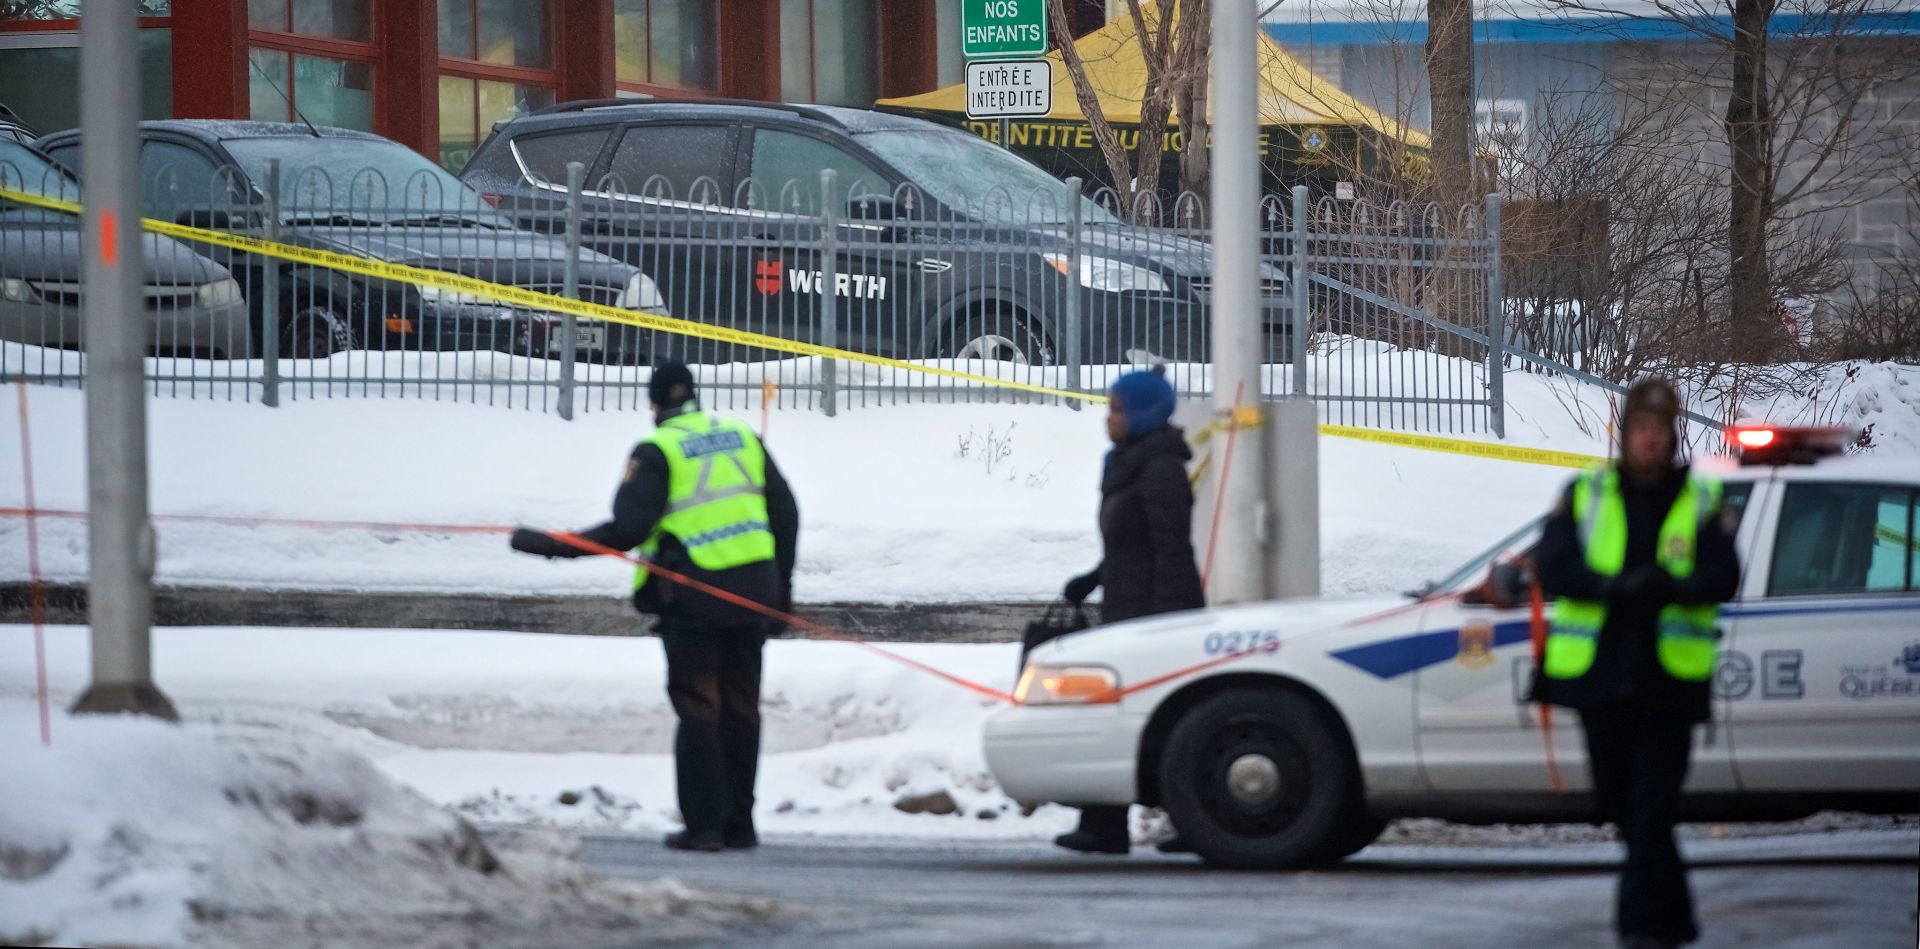 epa05761393 Municipal police patrols the scene where two gunmen opened fire in a Quebec City mosque during evening prayers on 29 January, killing six people and injuring eight others, at the Quebec Islamic Cultural Centre in Quebec City, Quebec, Canada, 30 January 2017. According to the police, six people were killed and another eight were wounded in a shooting at a Mosque during evening prayers on 29 January. Two suspects have been taken into custody. Canadian Prime Minister Justin Trudeau described the incident as a 'terrorist attack on Muslims,' media reported quoting his statement.  EPA/ANDRE PICHETTE